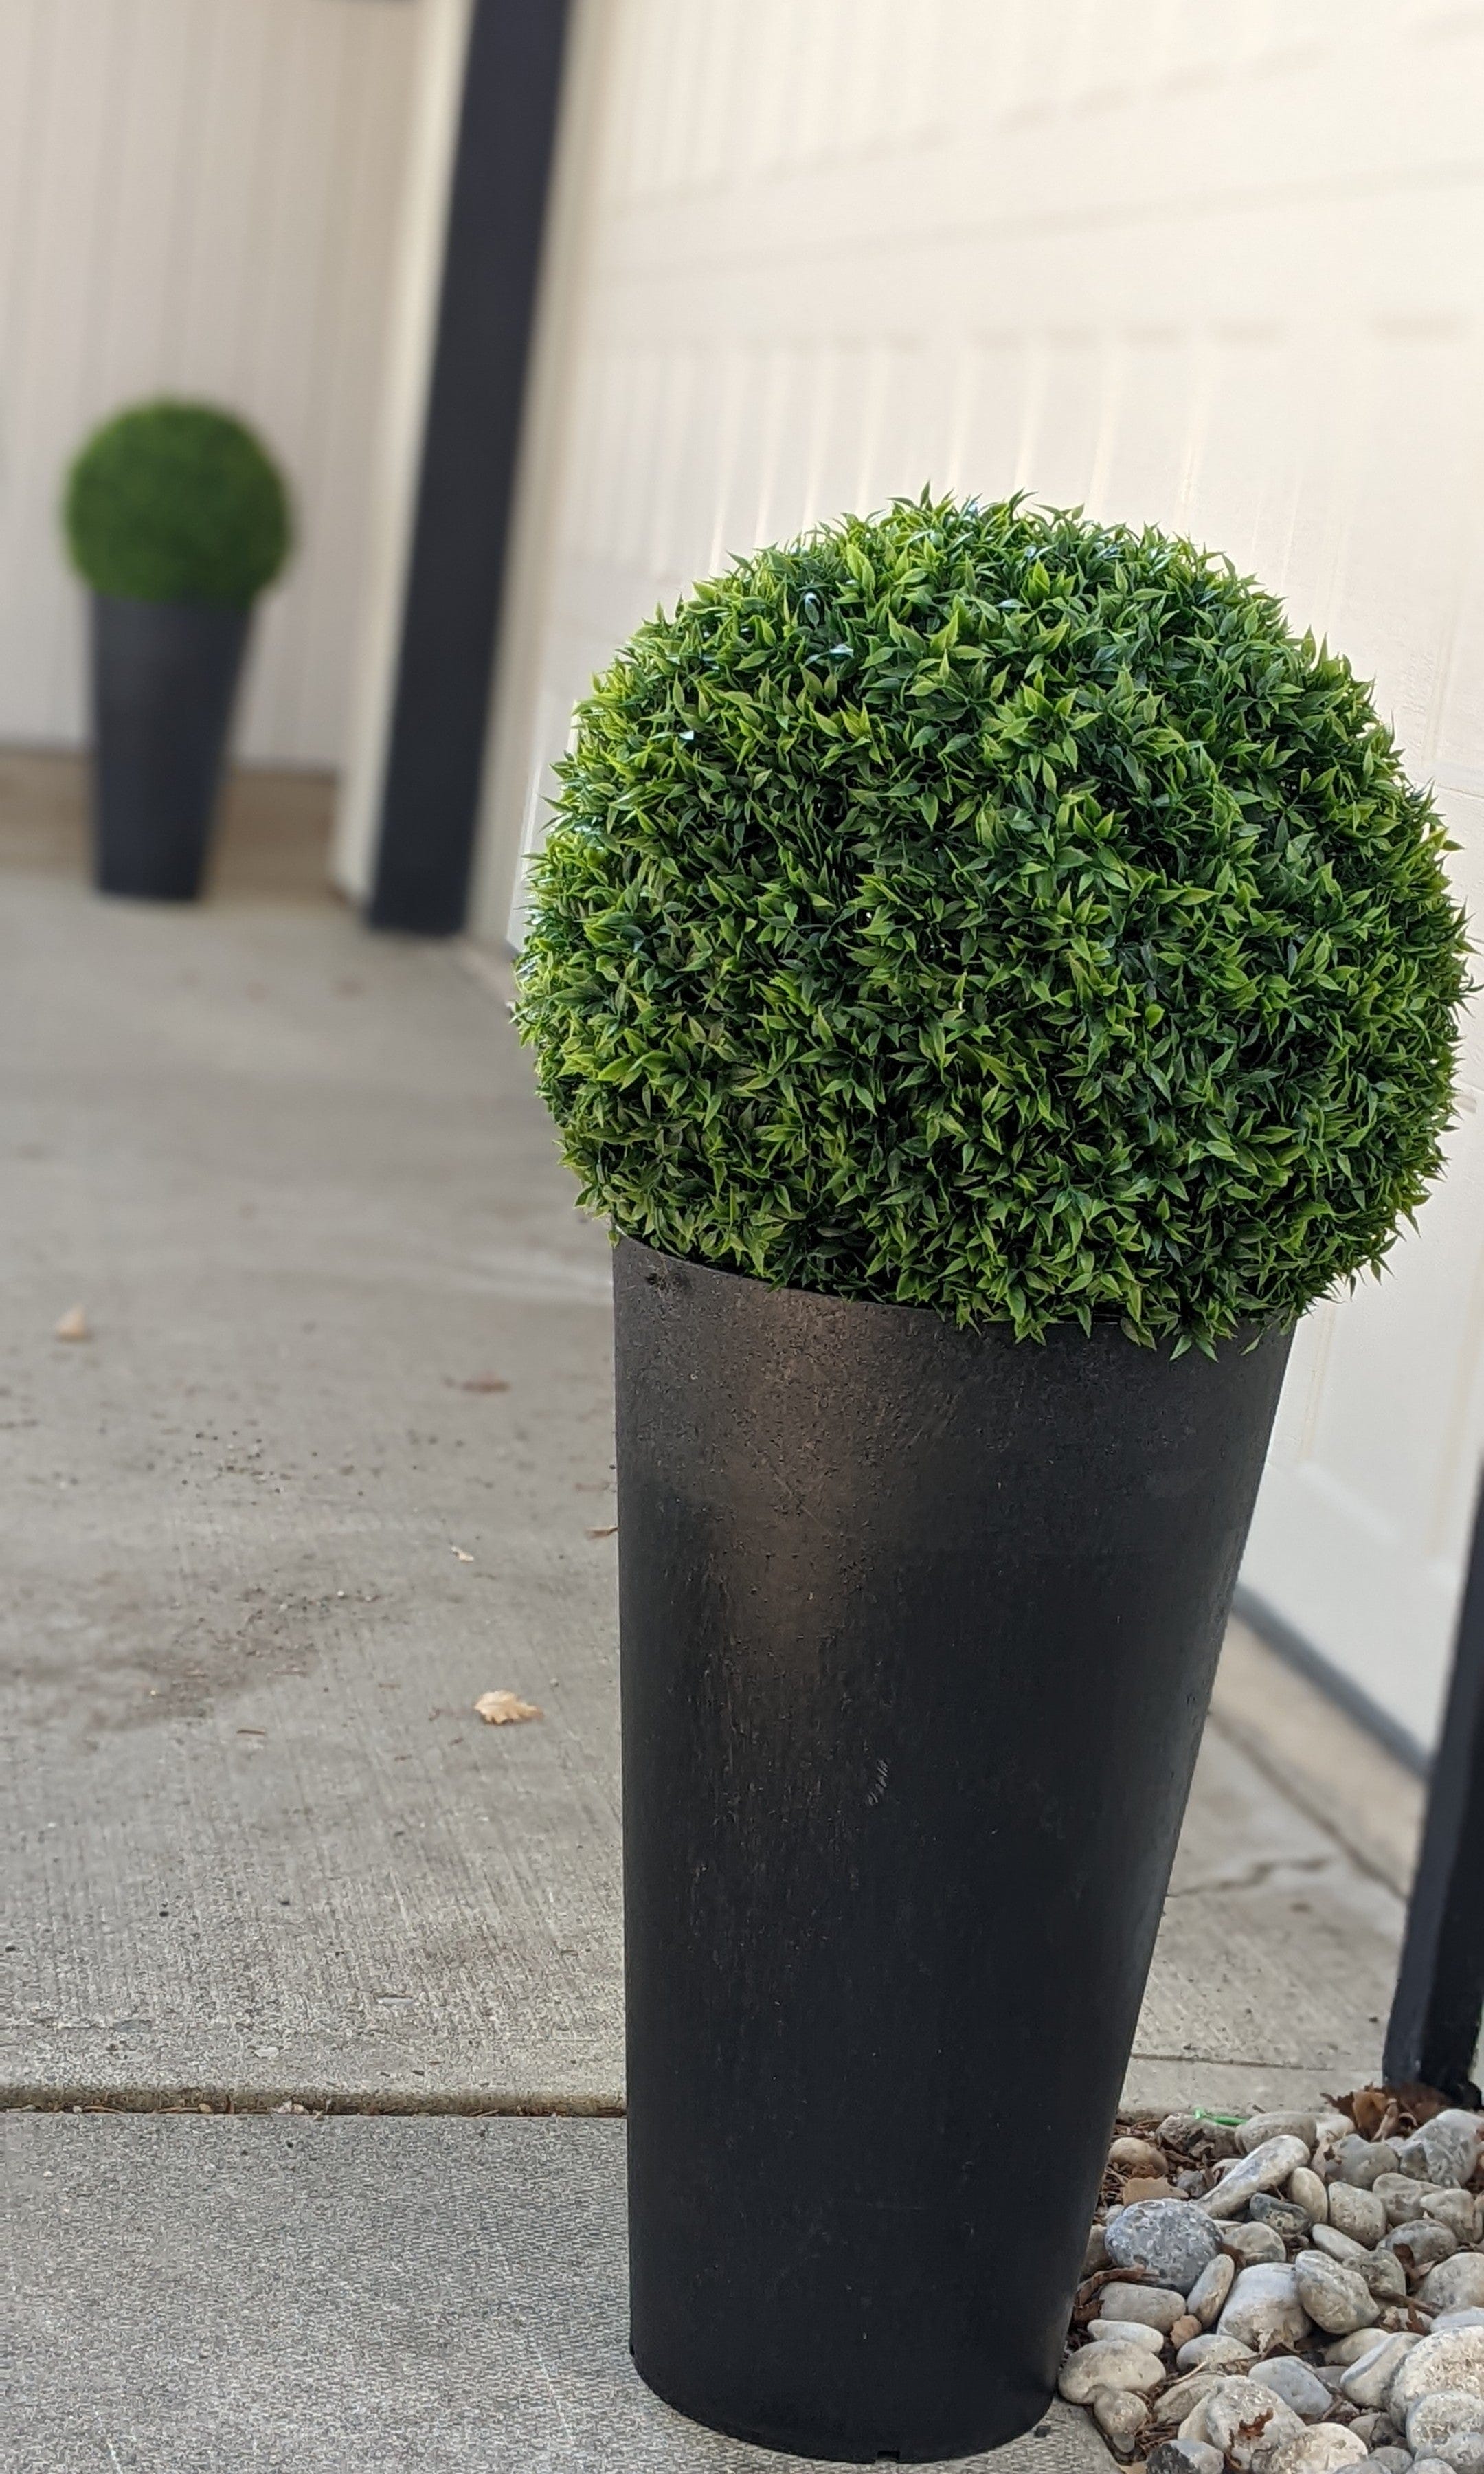 365 Curb Appeal Topiary ball Large 16 inch - Set of 2 Large Better Than A Boxwood Topiary Balls